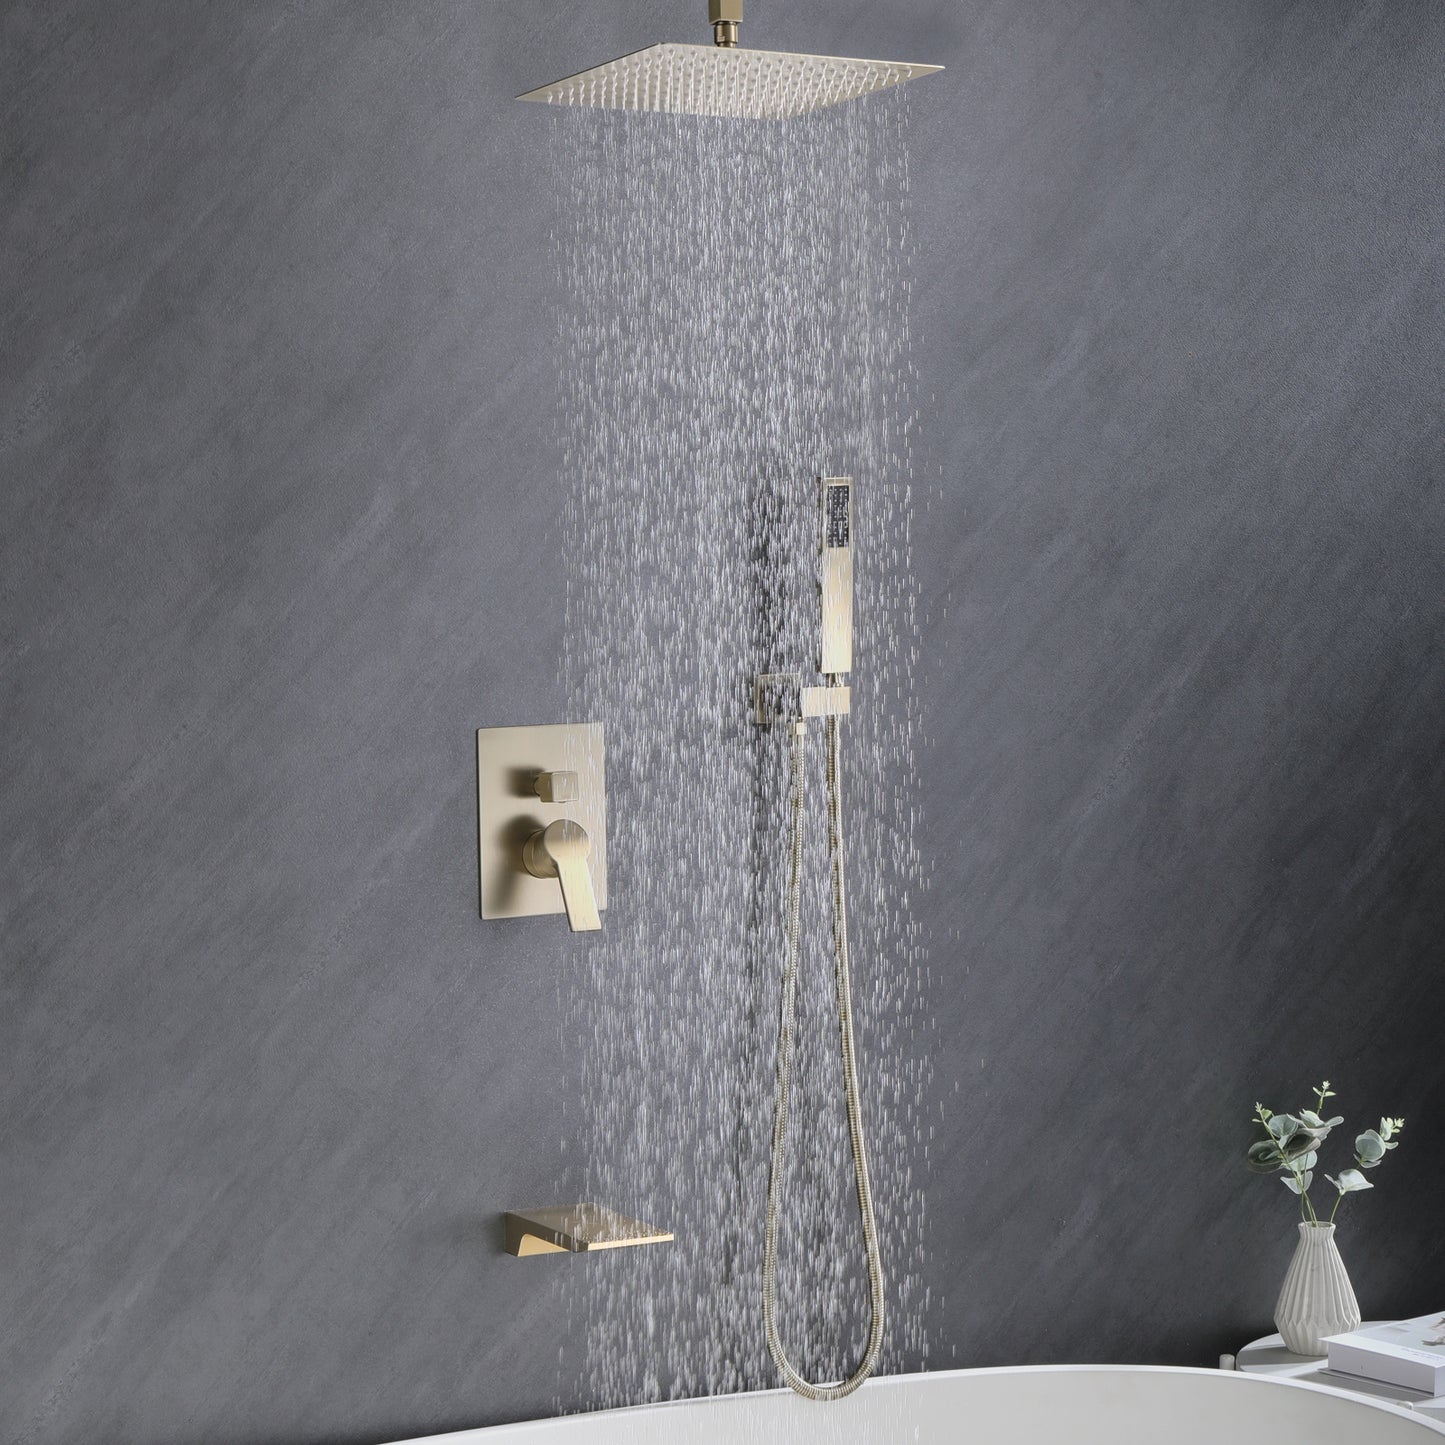 Brushed Gold 10 inches  Rain Shower Faucet Sets Complete With Shower System